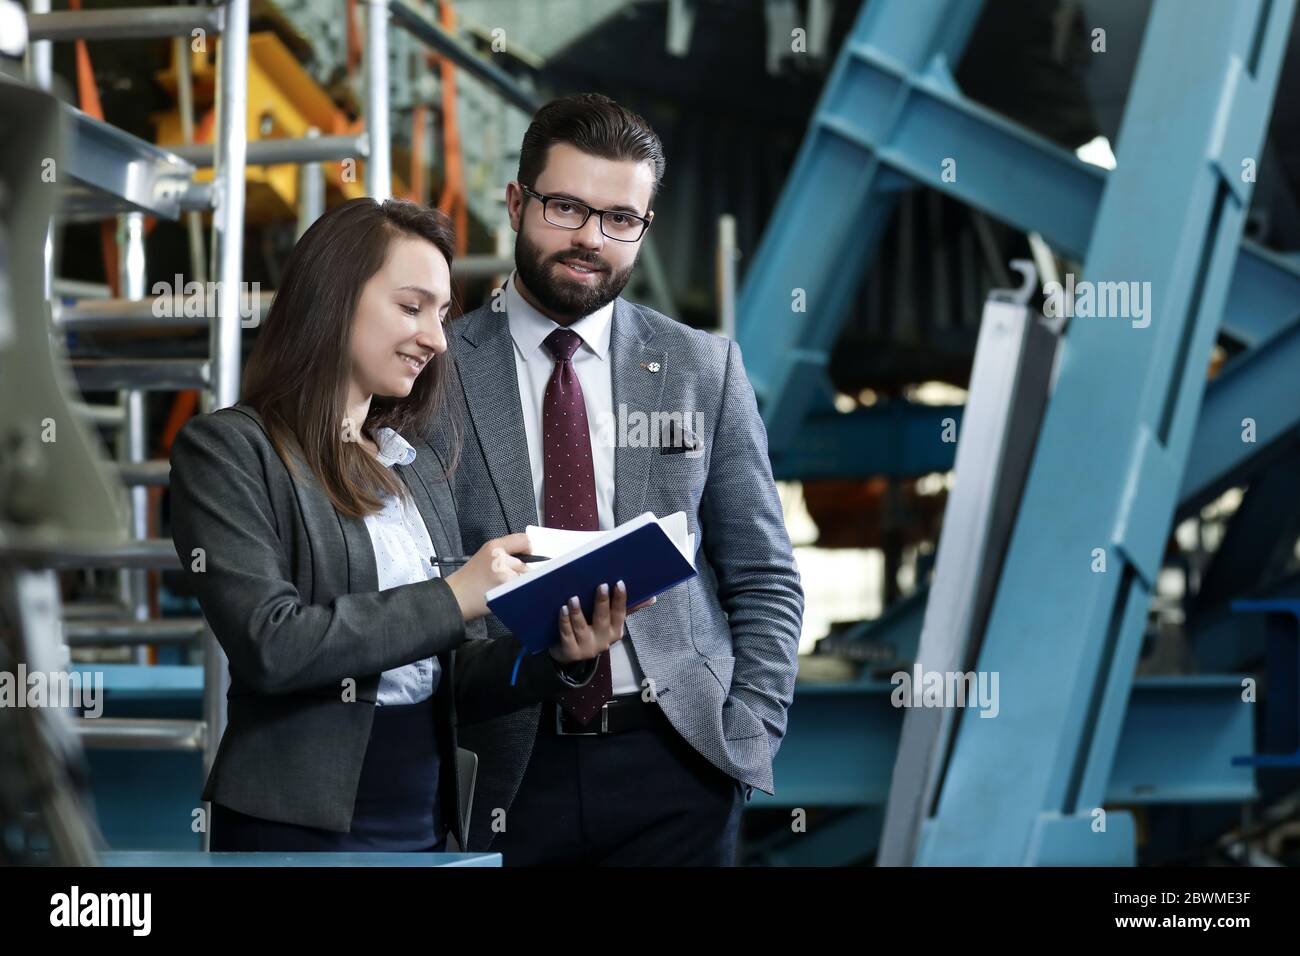 Portrait of a solid businessman with his secretary holding notebook, talking about factory financial report in a airplane manufactory. Factory manager Stock Photo